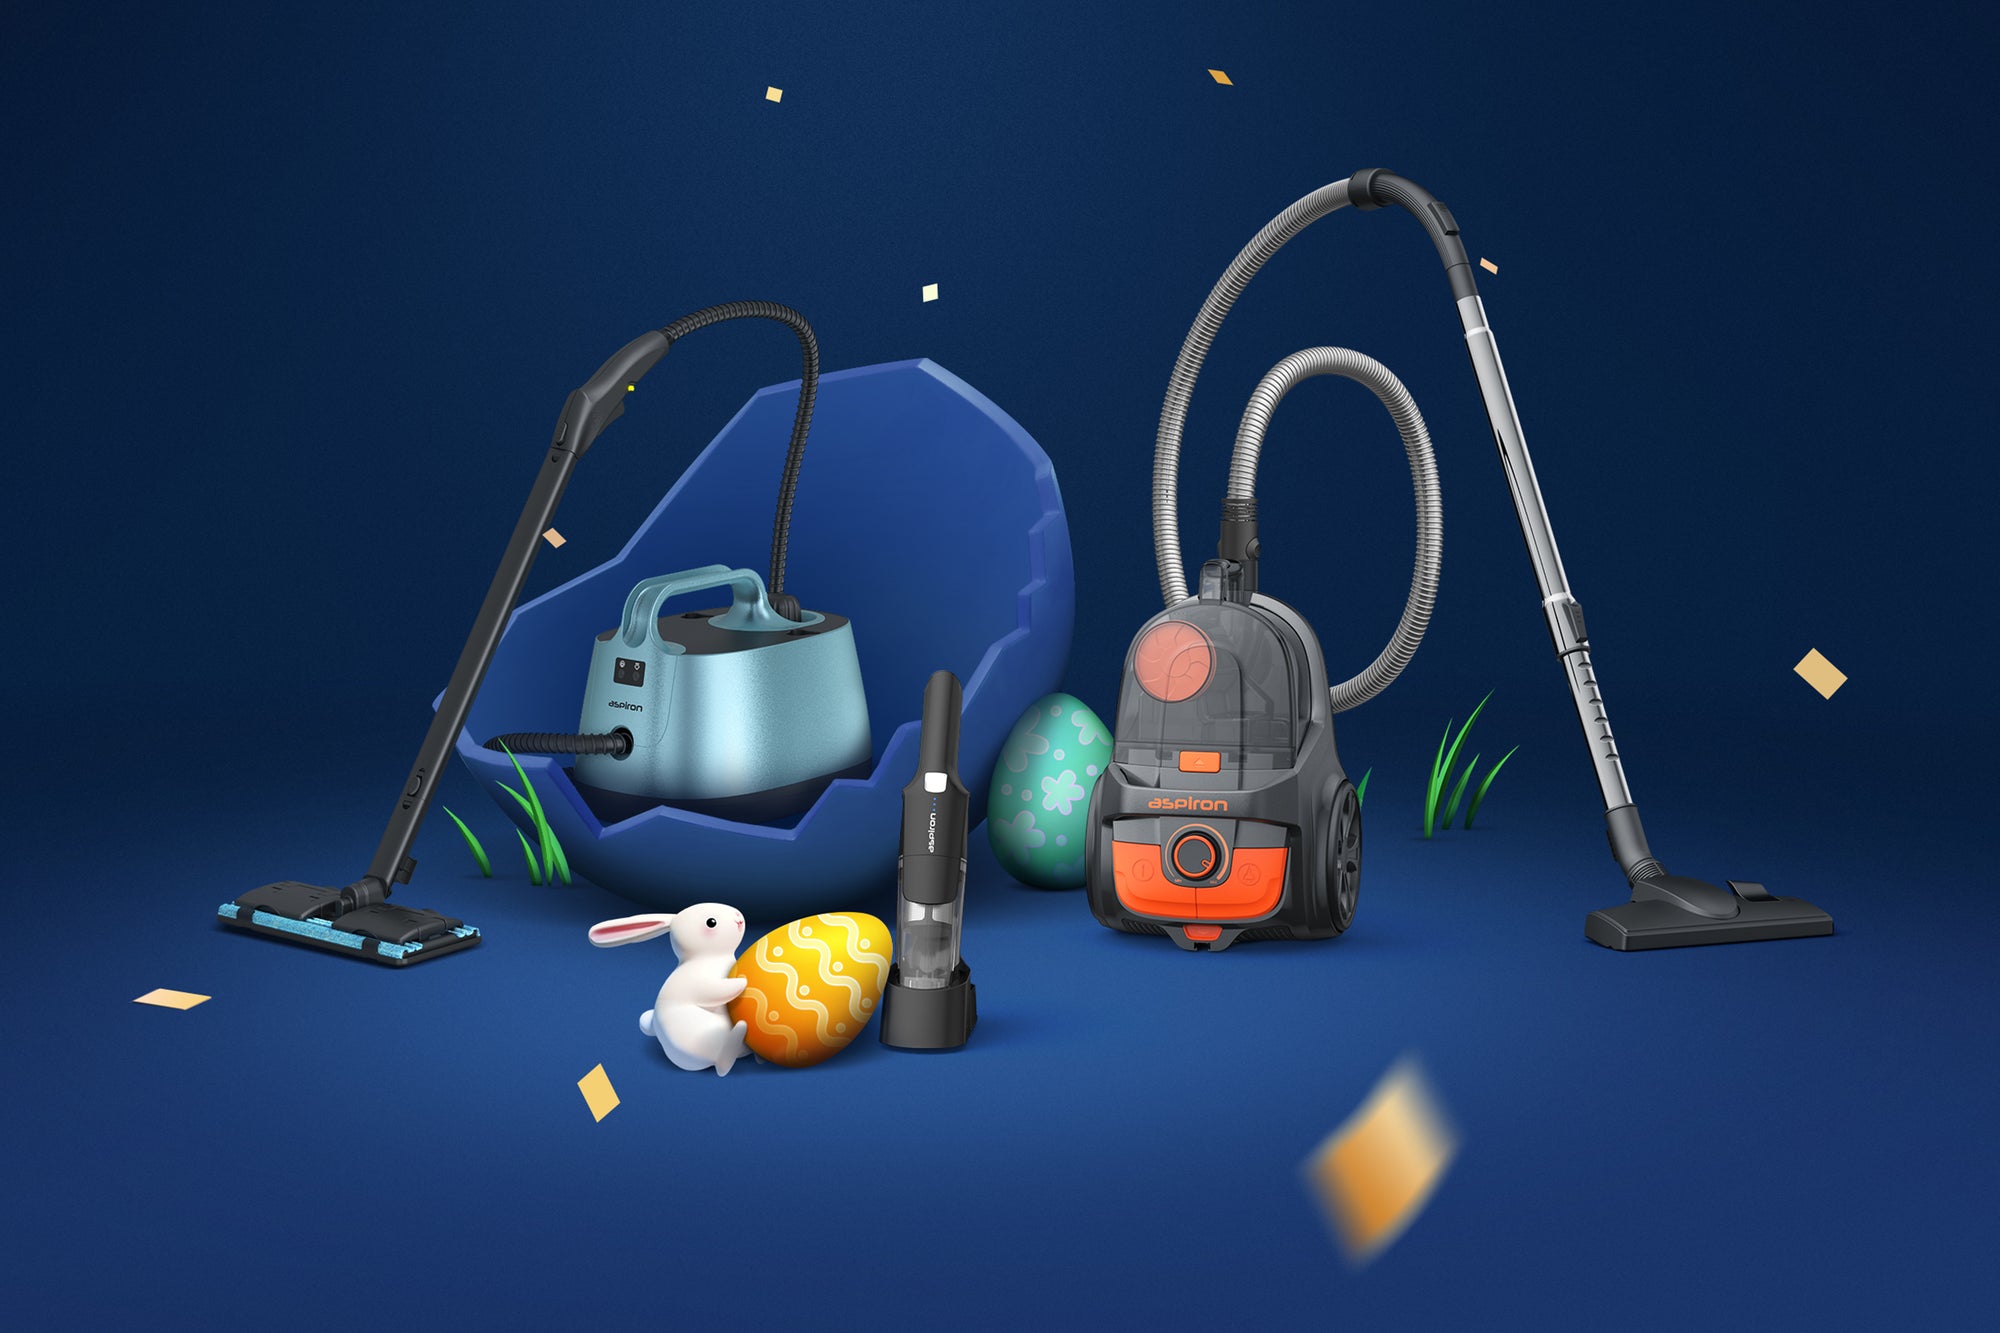 Home Cleaning Just Got Better with Aspiron’s Easter Sale